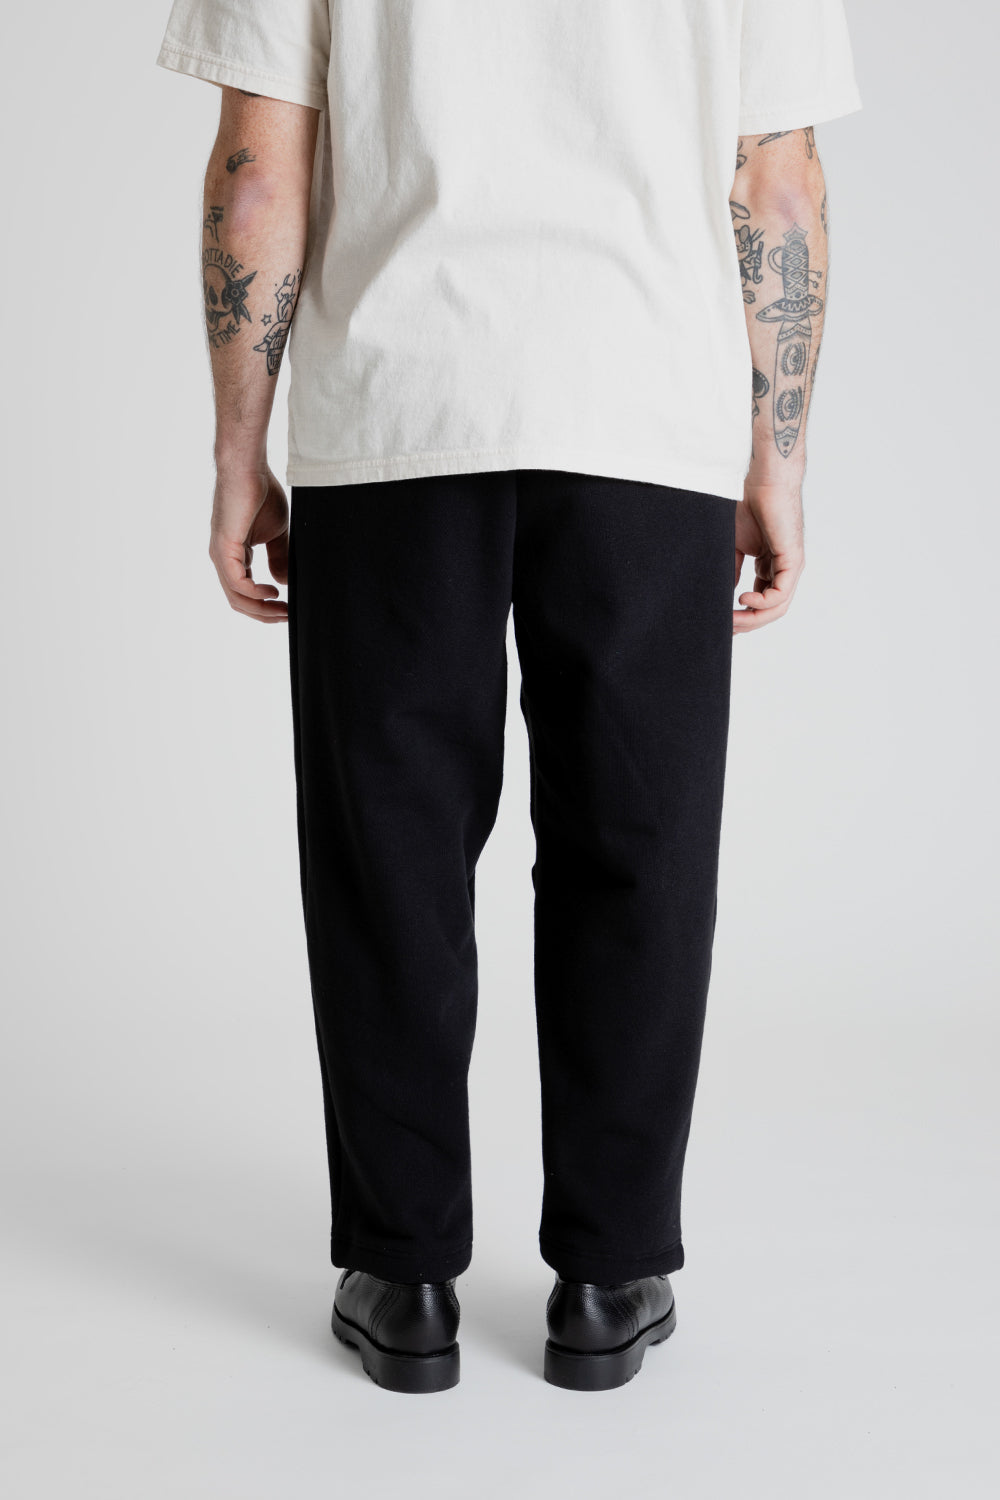 Jackman Stretch Sweat Buggy Pants in Black